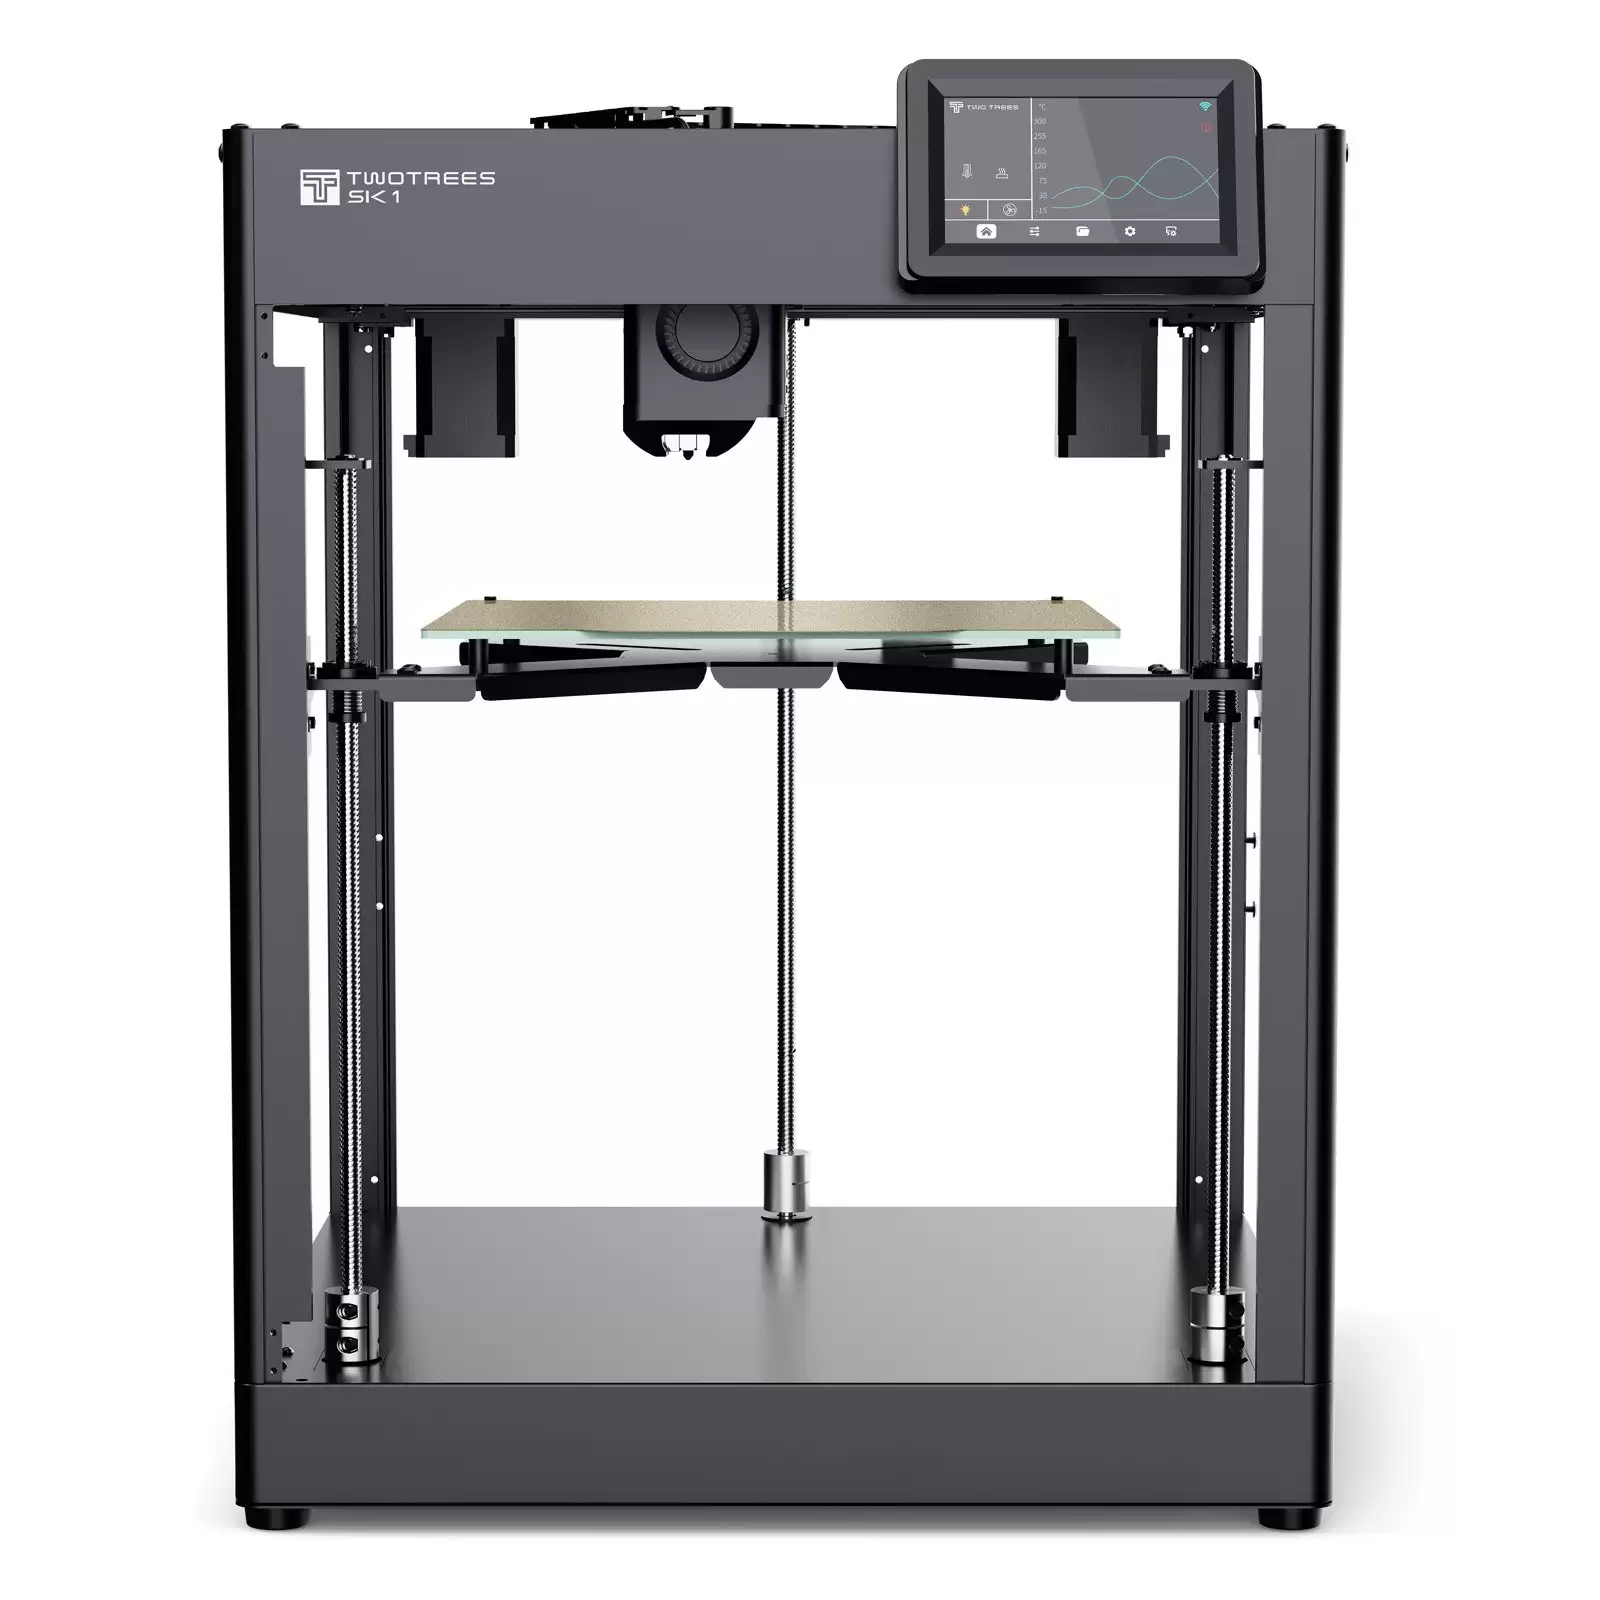 Pay Only $405 For Two Trees Sk1 3d Printer 700mm/S High-Speed Printing Compatible With Klipper Firmware Wifi Remote Control Support Z-Tilt Auto-Leveling With This Discount Coupon At Tomtop